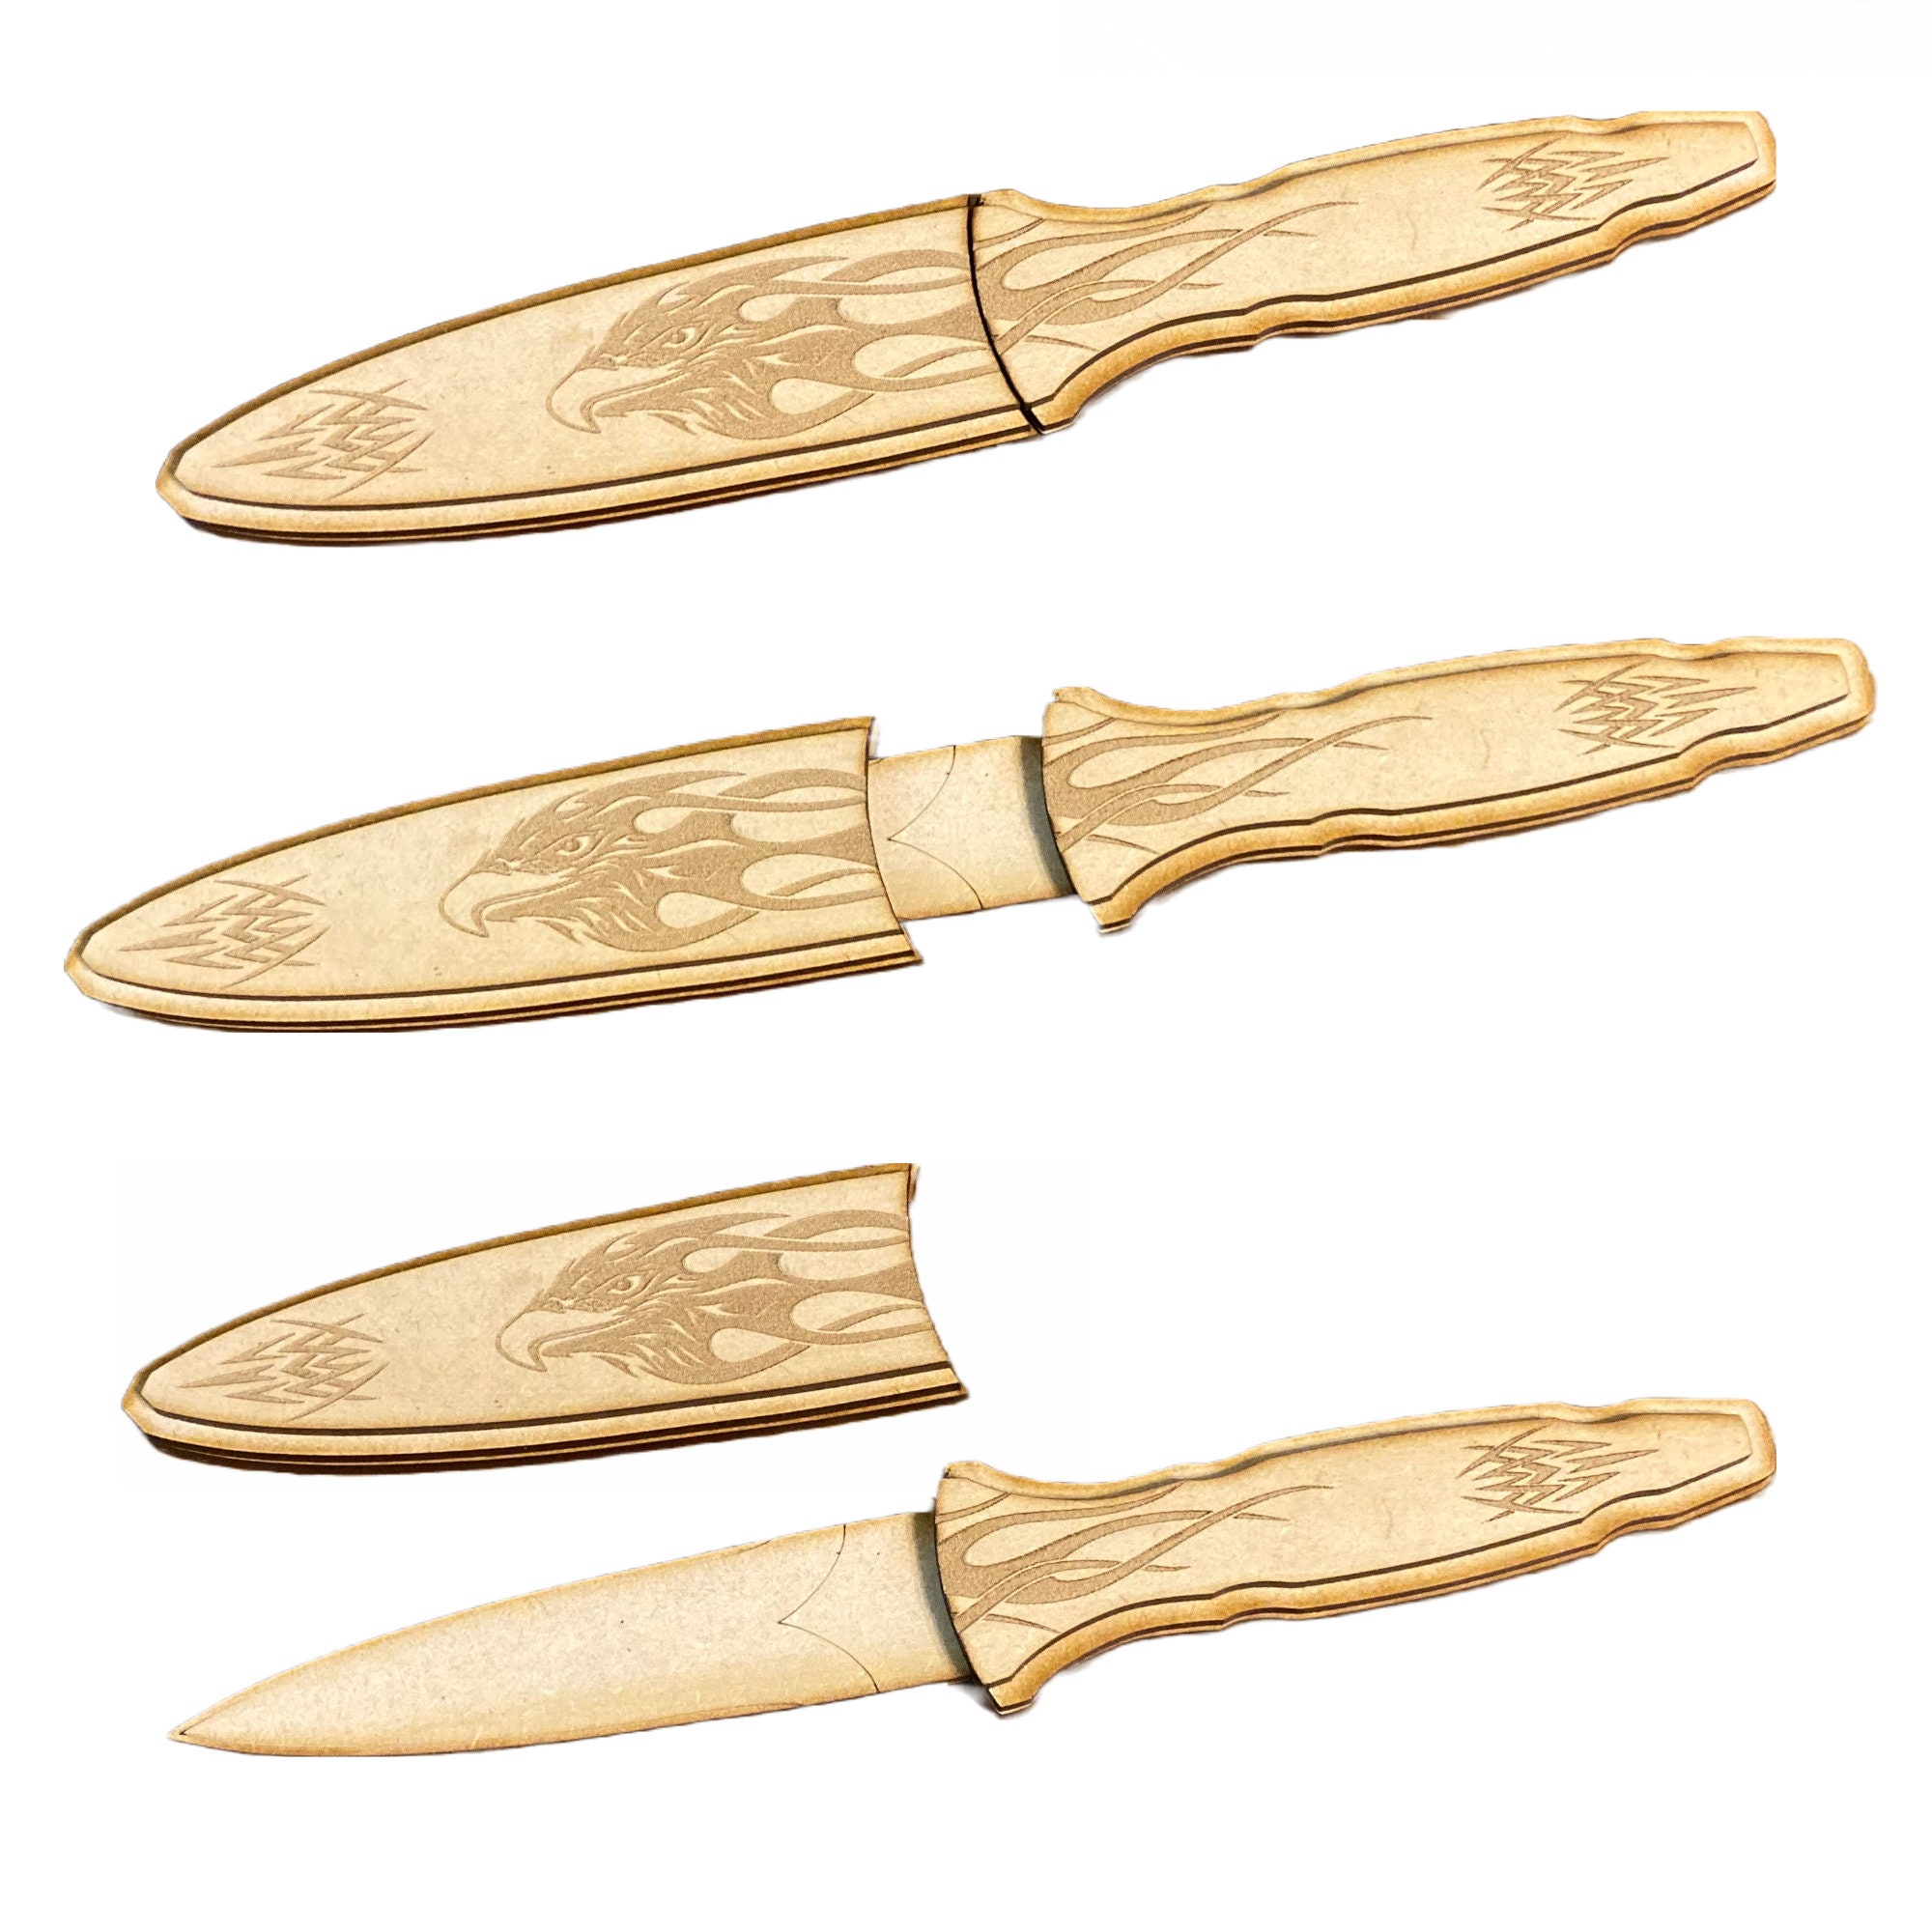 Wooden Toy Knife - Wood Practice Eco Friendly Knife Toys with Safe Blunt  Edge Made in Ukraine Especially for the USA Lightweight Pocket Sword for  Kids